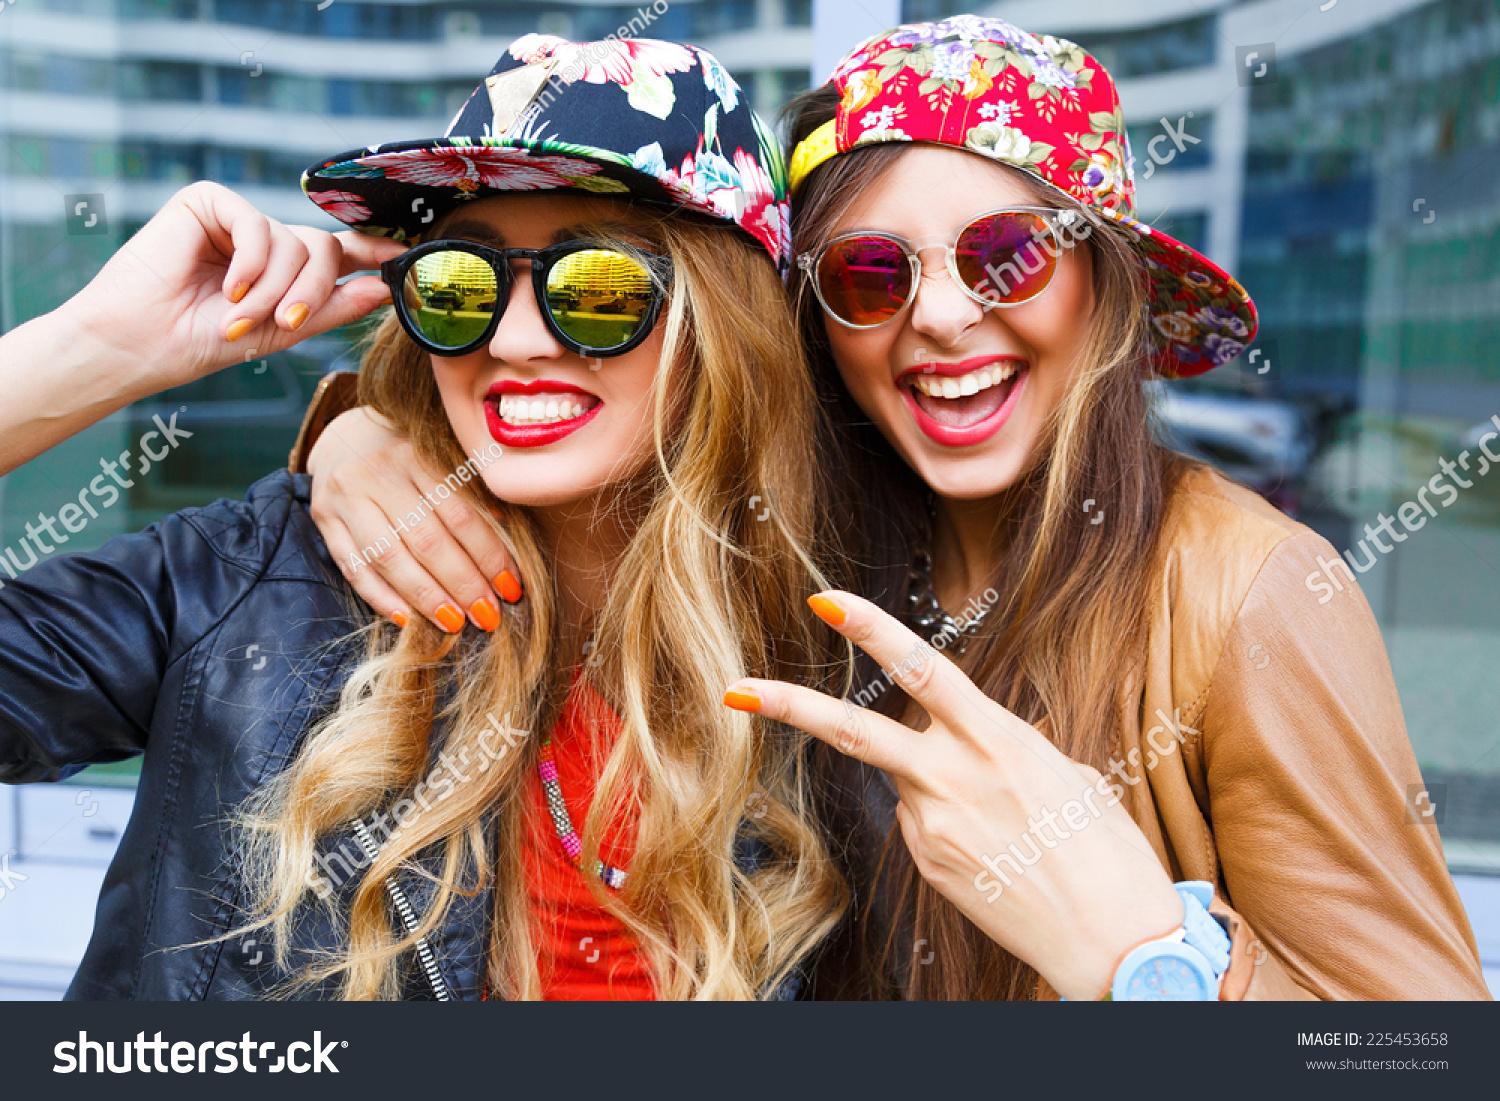 Closeup fashion lifestyle portrait of two pretty best friends girls, wearing bright swag style floral hats, mirrored sunglasses, having fun and make crazy funny faces. Two sisters posing on party. #225453658